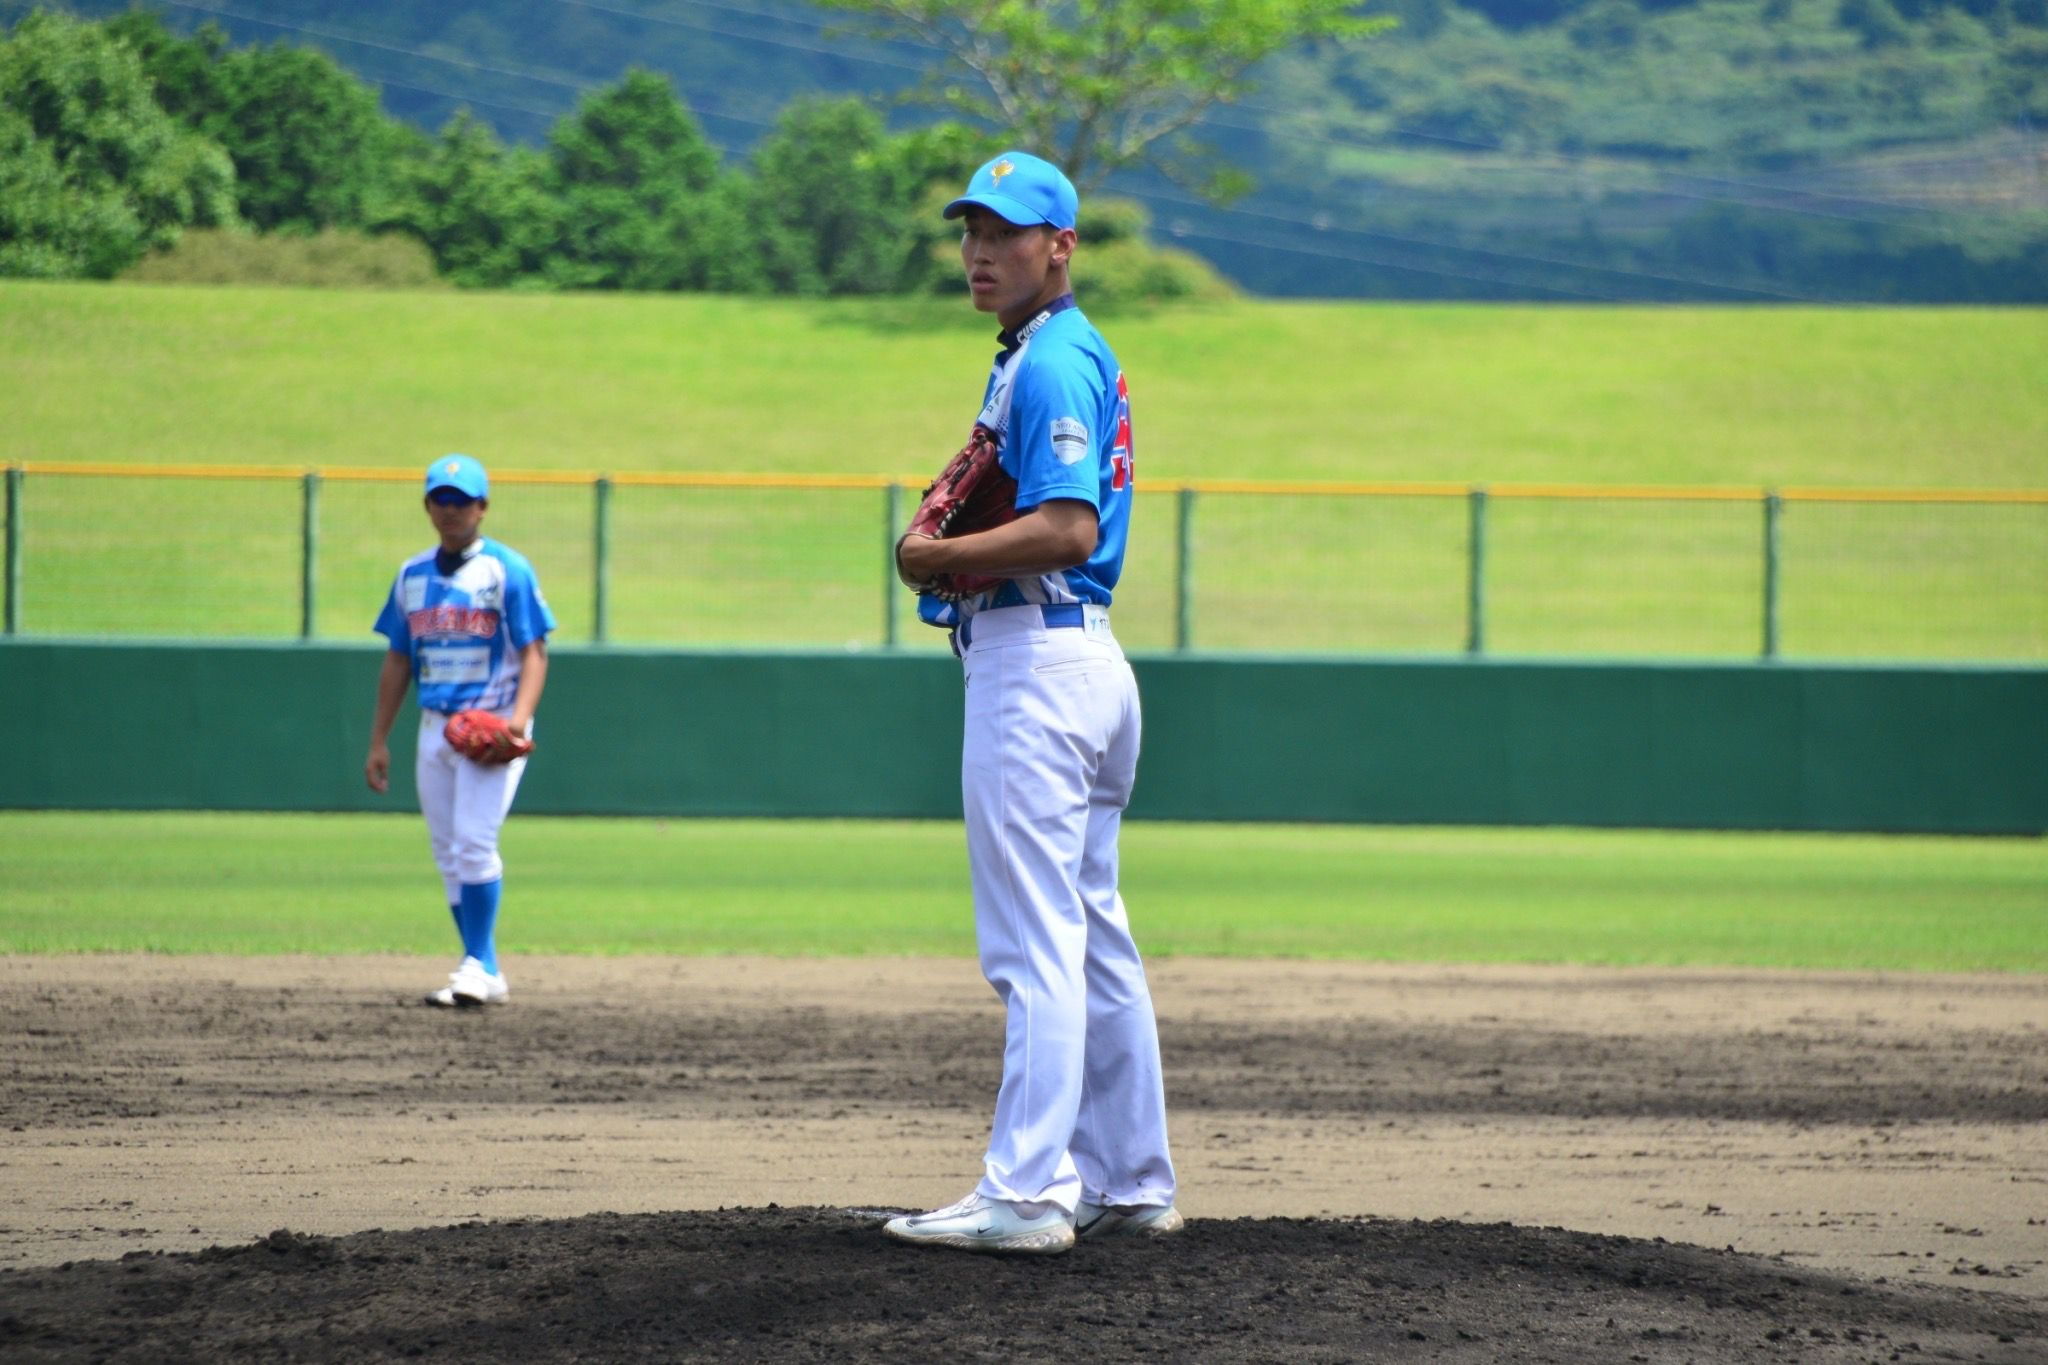 Meet Eleazar, the Singaporean Who Quit The RSAF to Play Pro Baseball in Japan